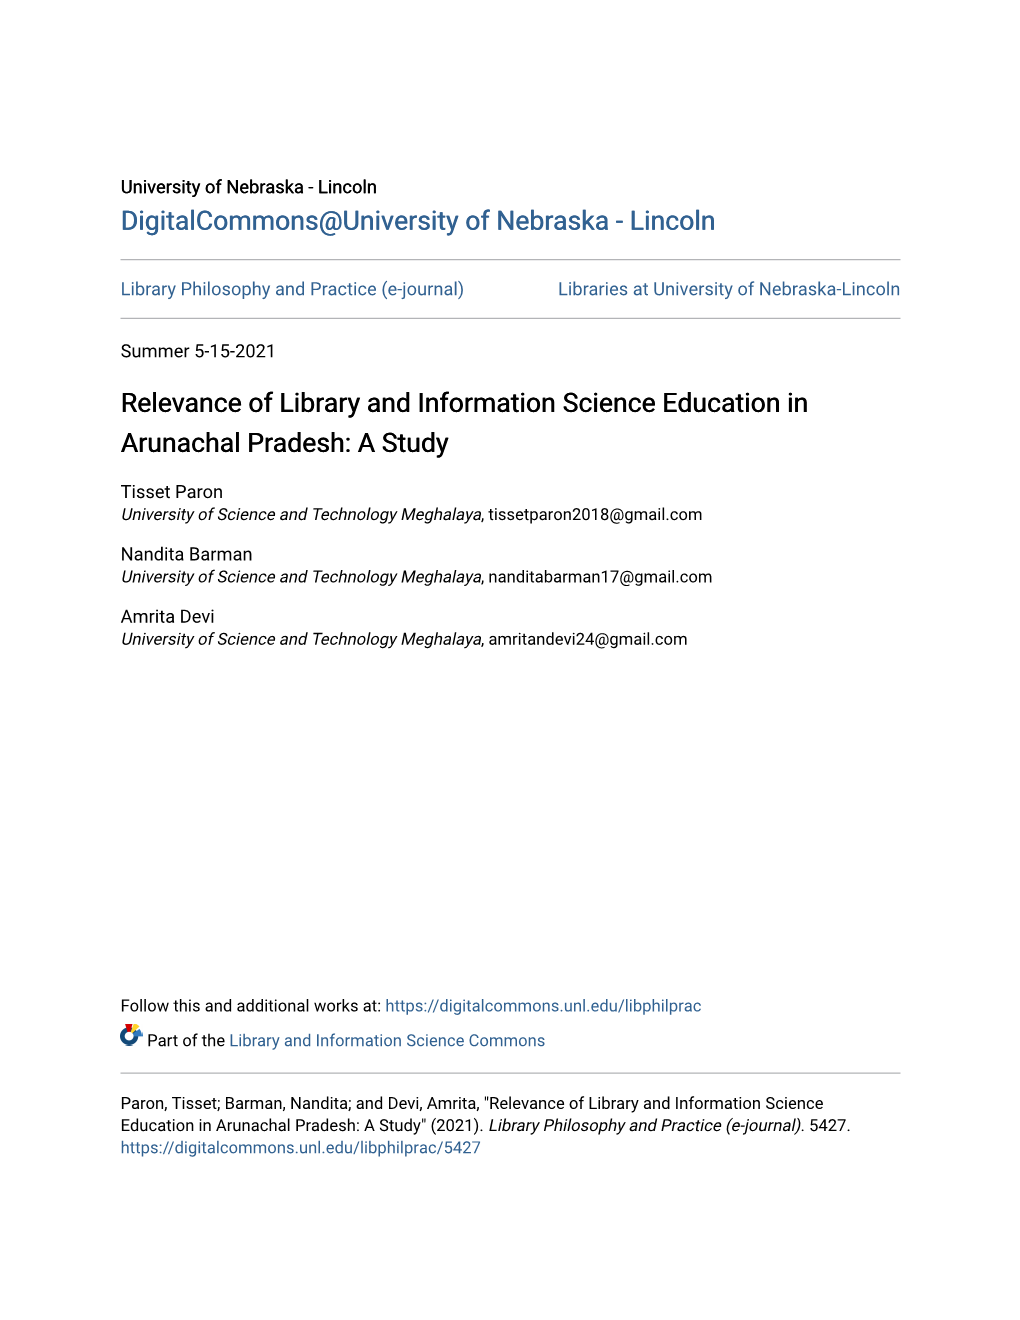 Relevance of Library and Information Science Education in Arunachal Pradesh: a Study